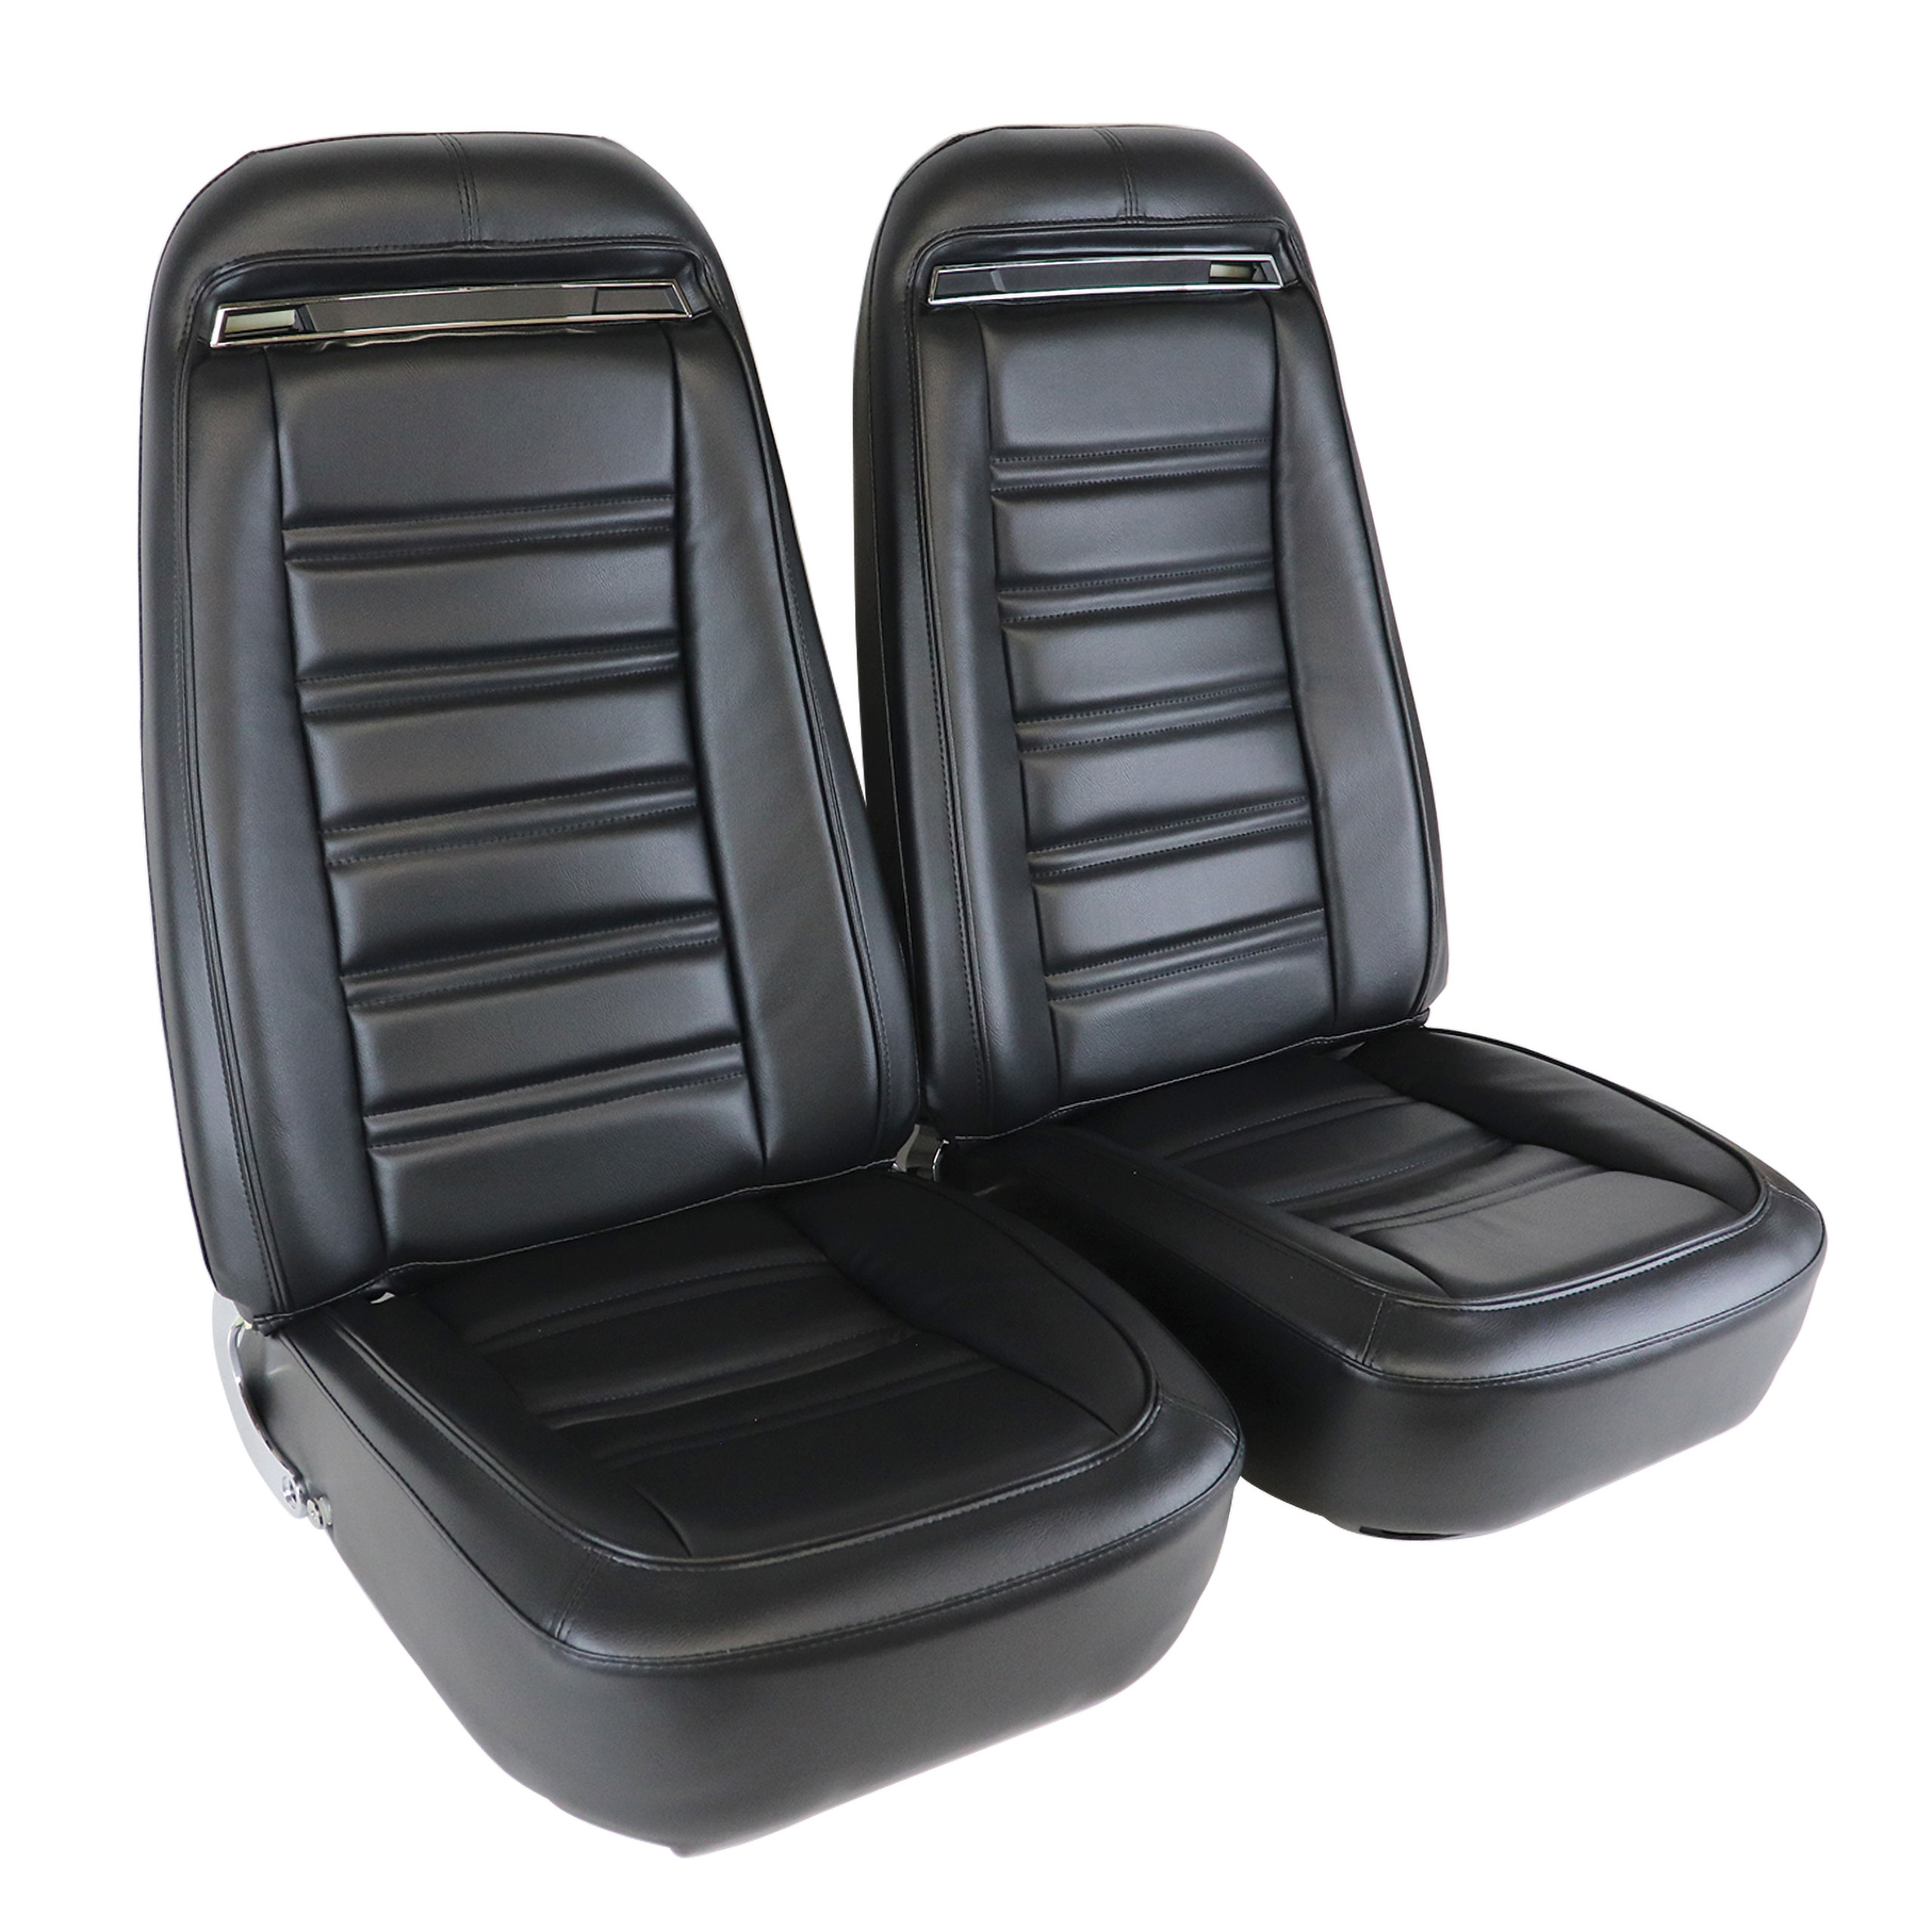 1975 C3 Corvette Mounted Seats Black "Leather-Like" Vinyl With Shoulder Harness